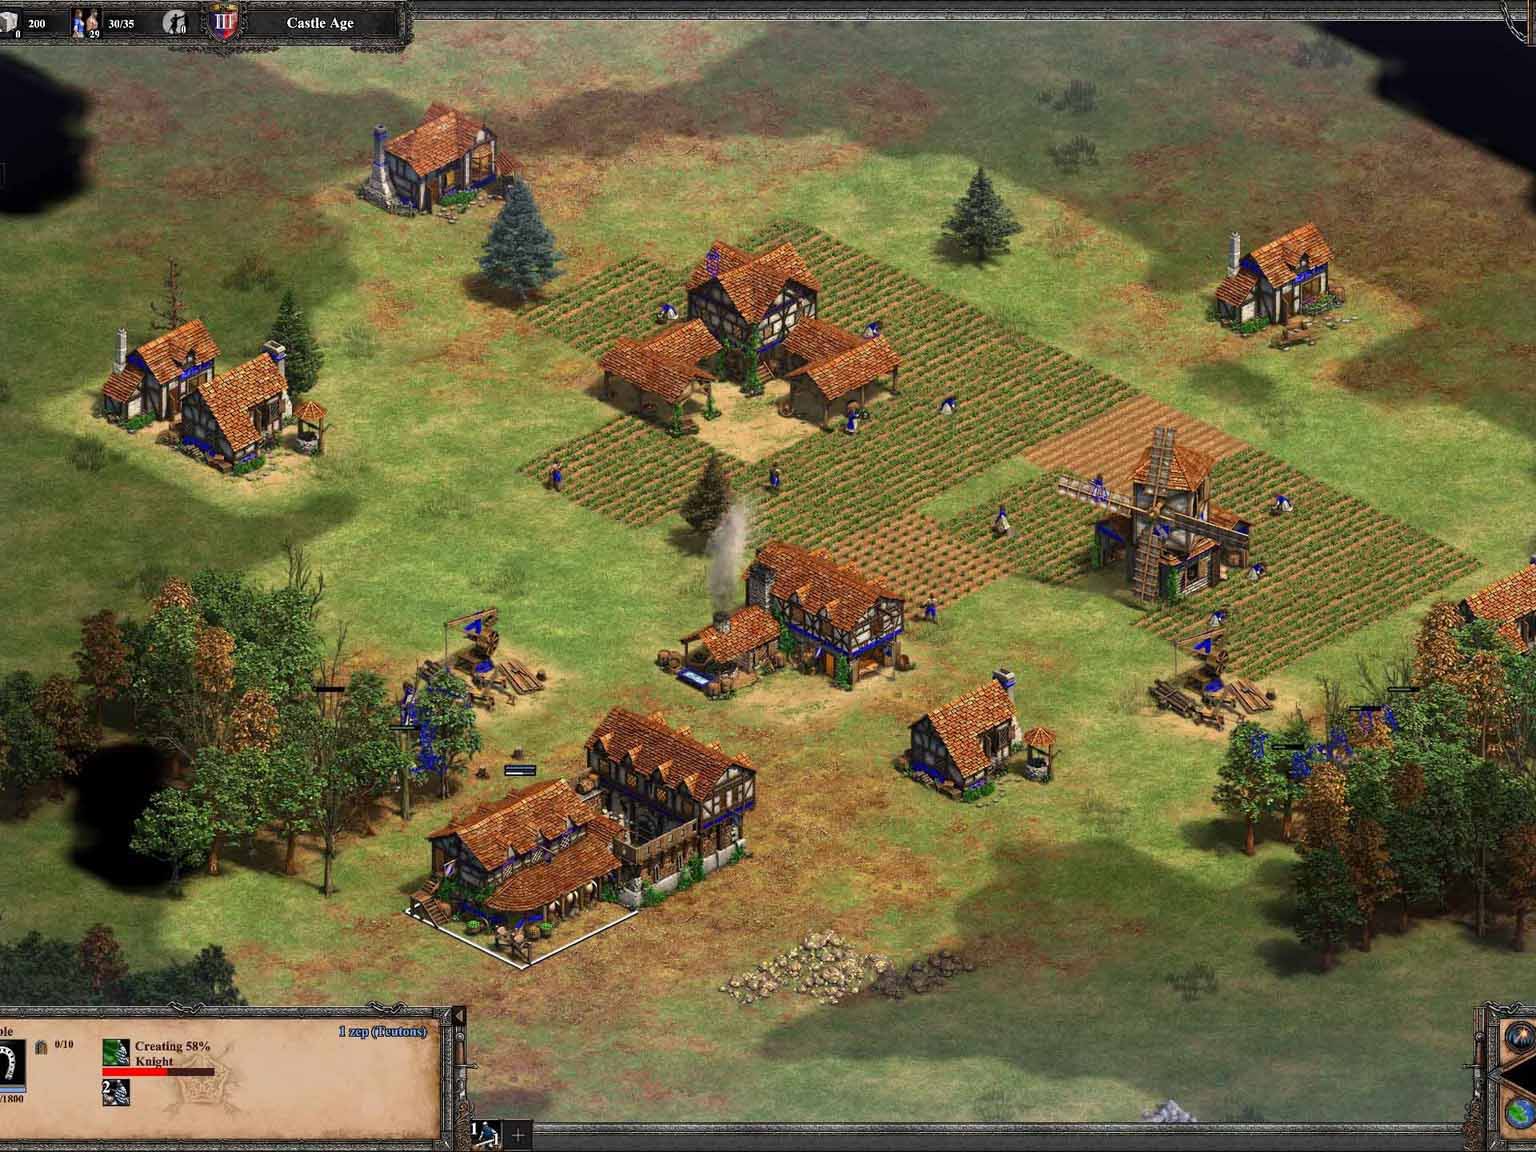 age-of-empires-town-center-01.jpg